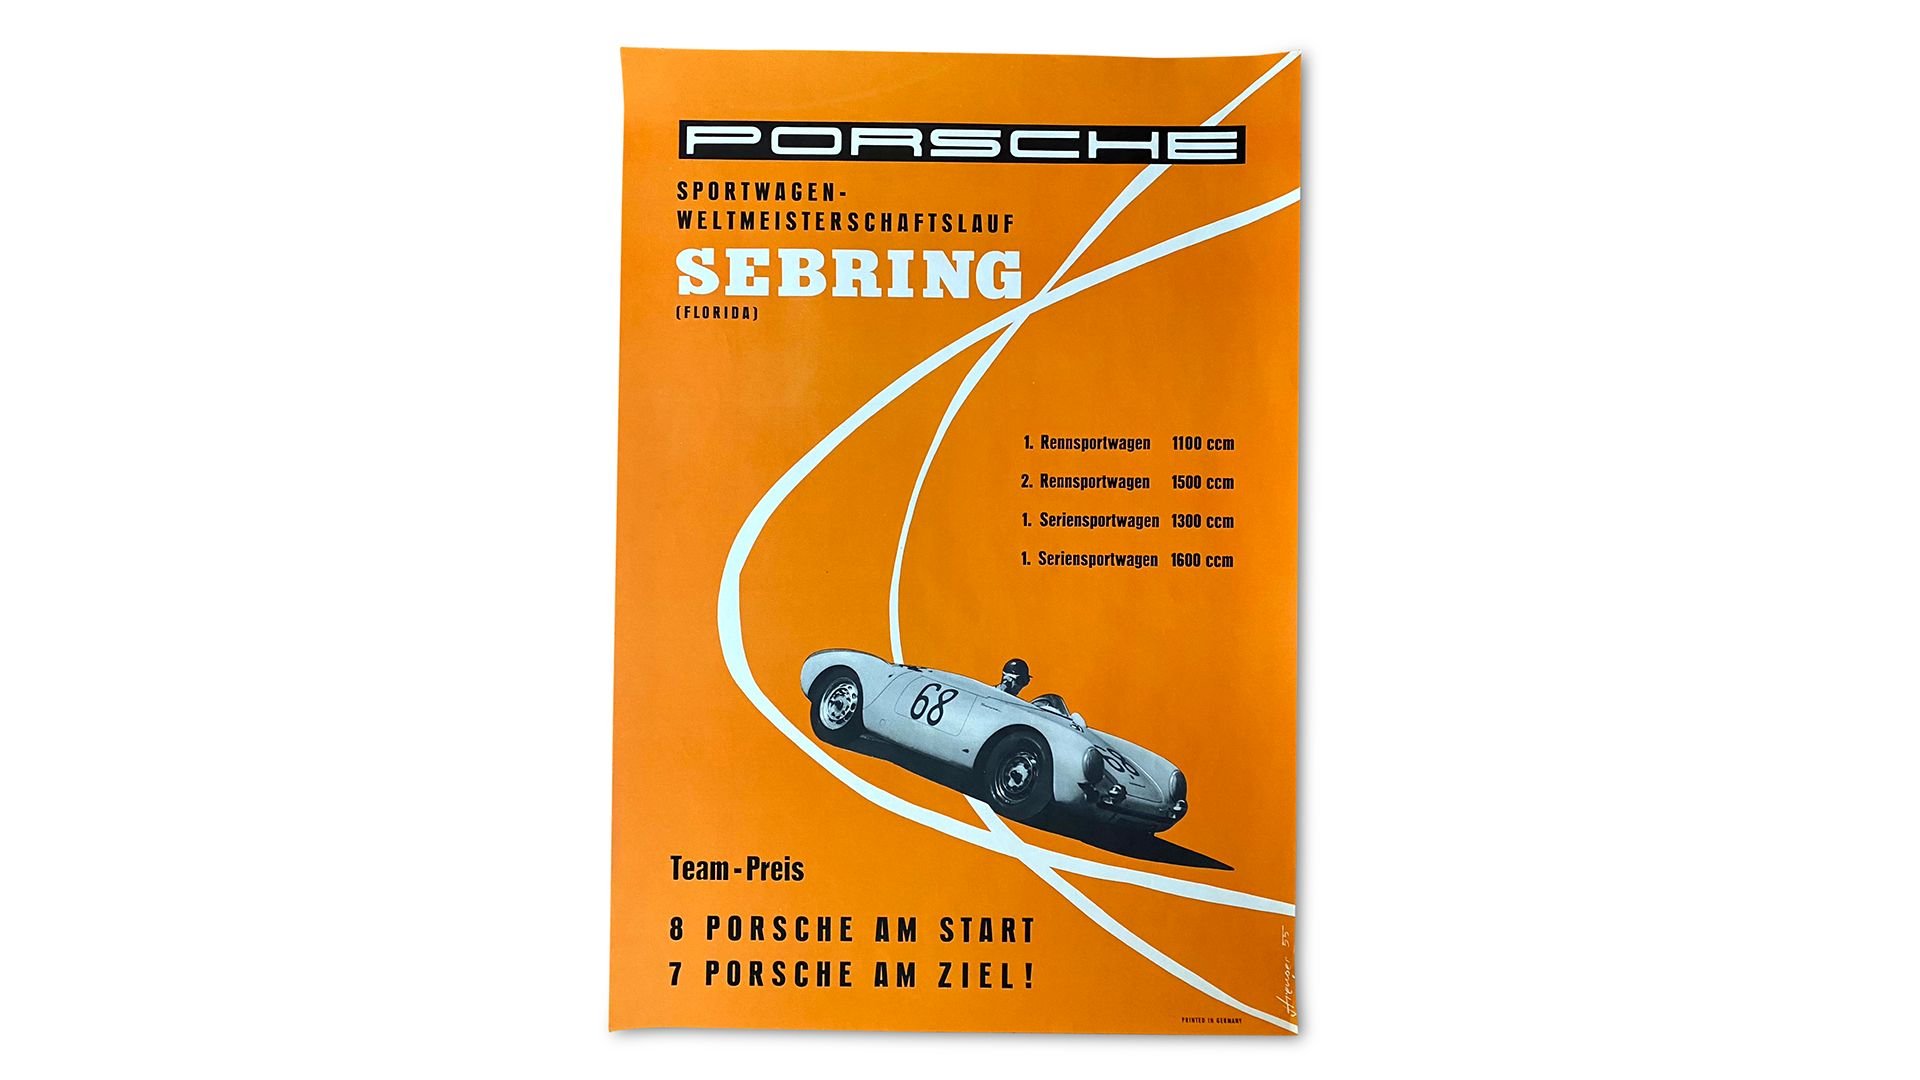 For Sale 1955 Sebring 12 Hours and 1959 Sebring 12 Hours Porsche Factory Racing Posters